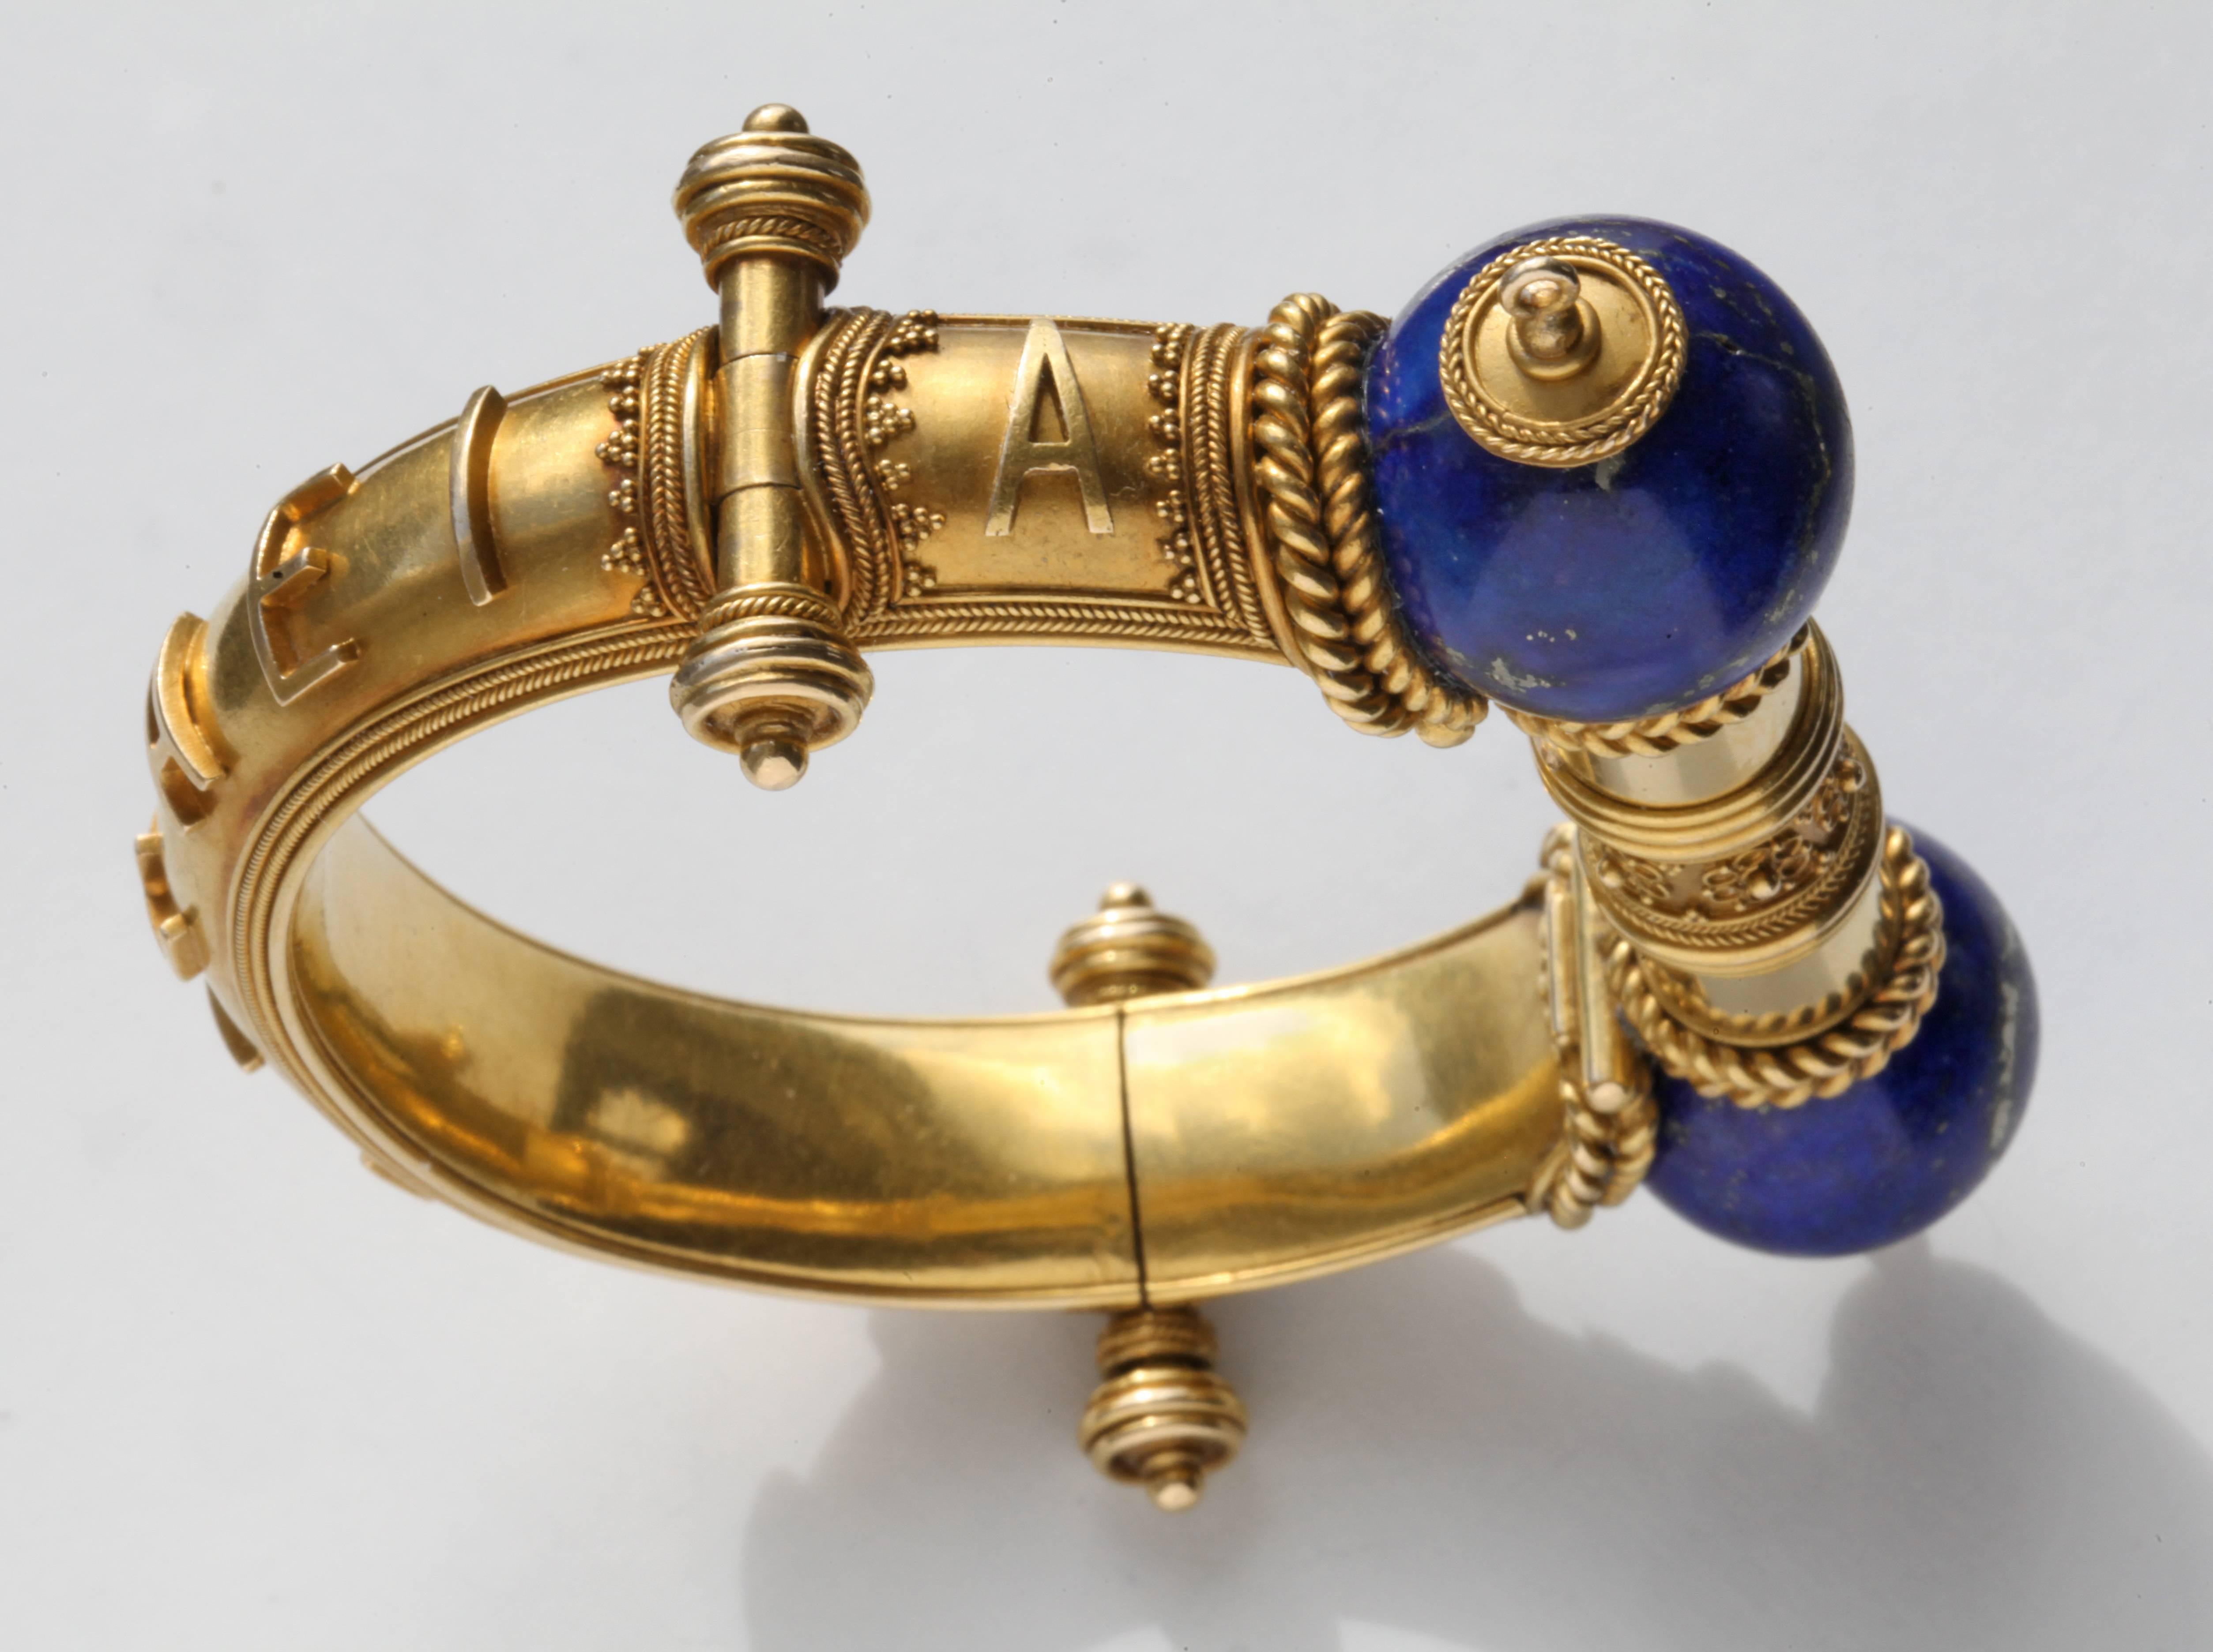 A stunning Victorian gold & lapis lazuli hinged bangle, beautifully made probably by John Brogden. The Etruscan revival design has stylized hinges with locking post clasp, applied scrolled wire work and bead detail. Applied lettering to the band,